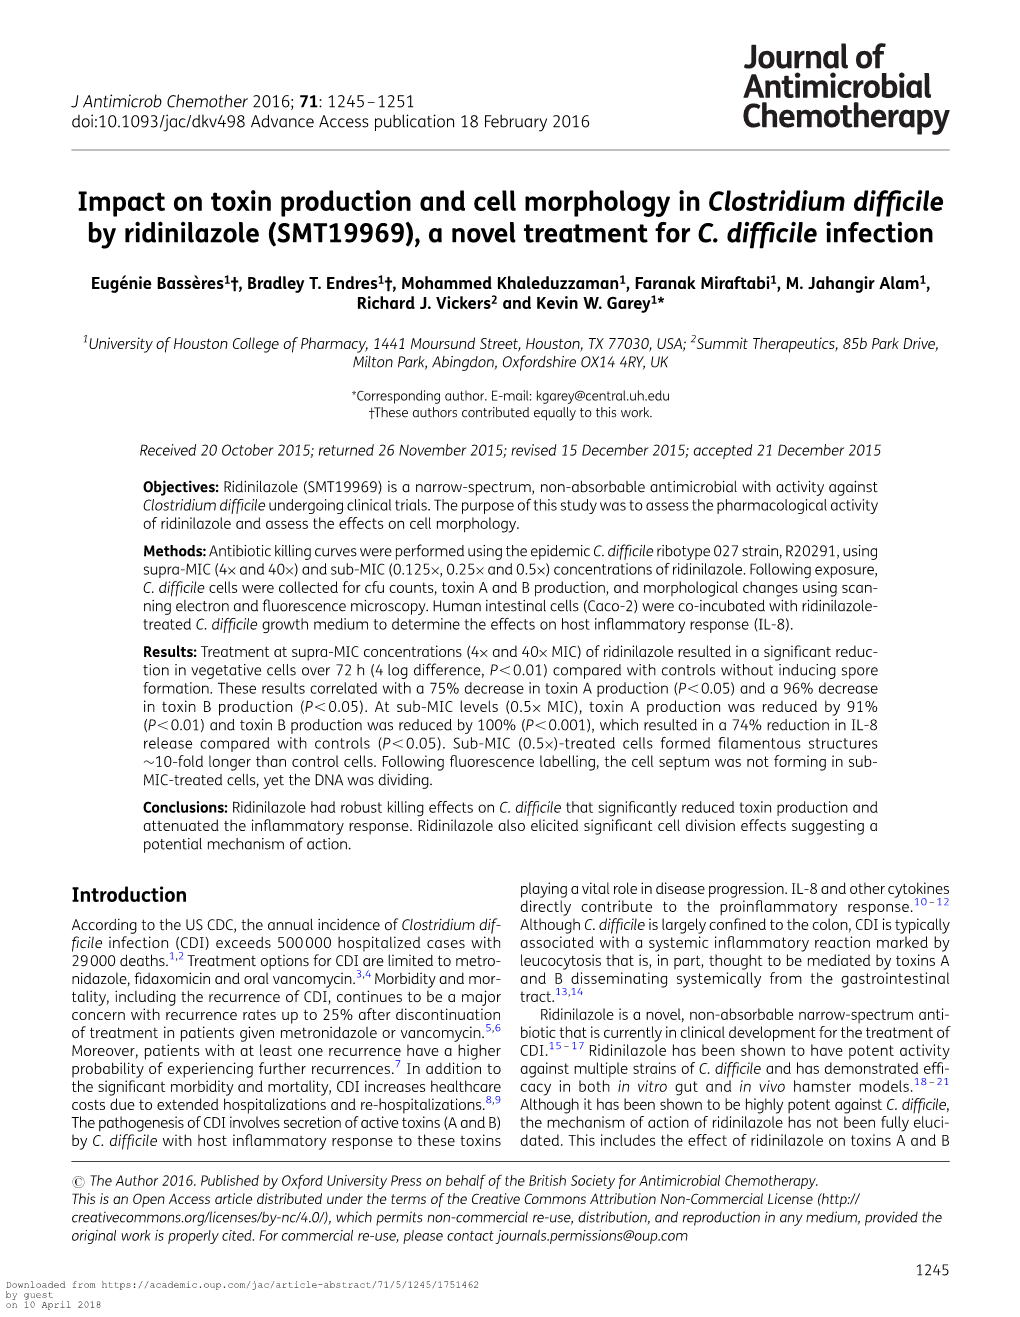 Impact on Toxin Production and Cell Morphology in Clostridium Difﬁcile by Ridinilazole (SMT19969), a Novel Treatment for C